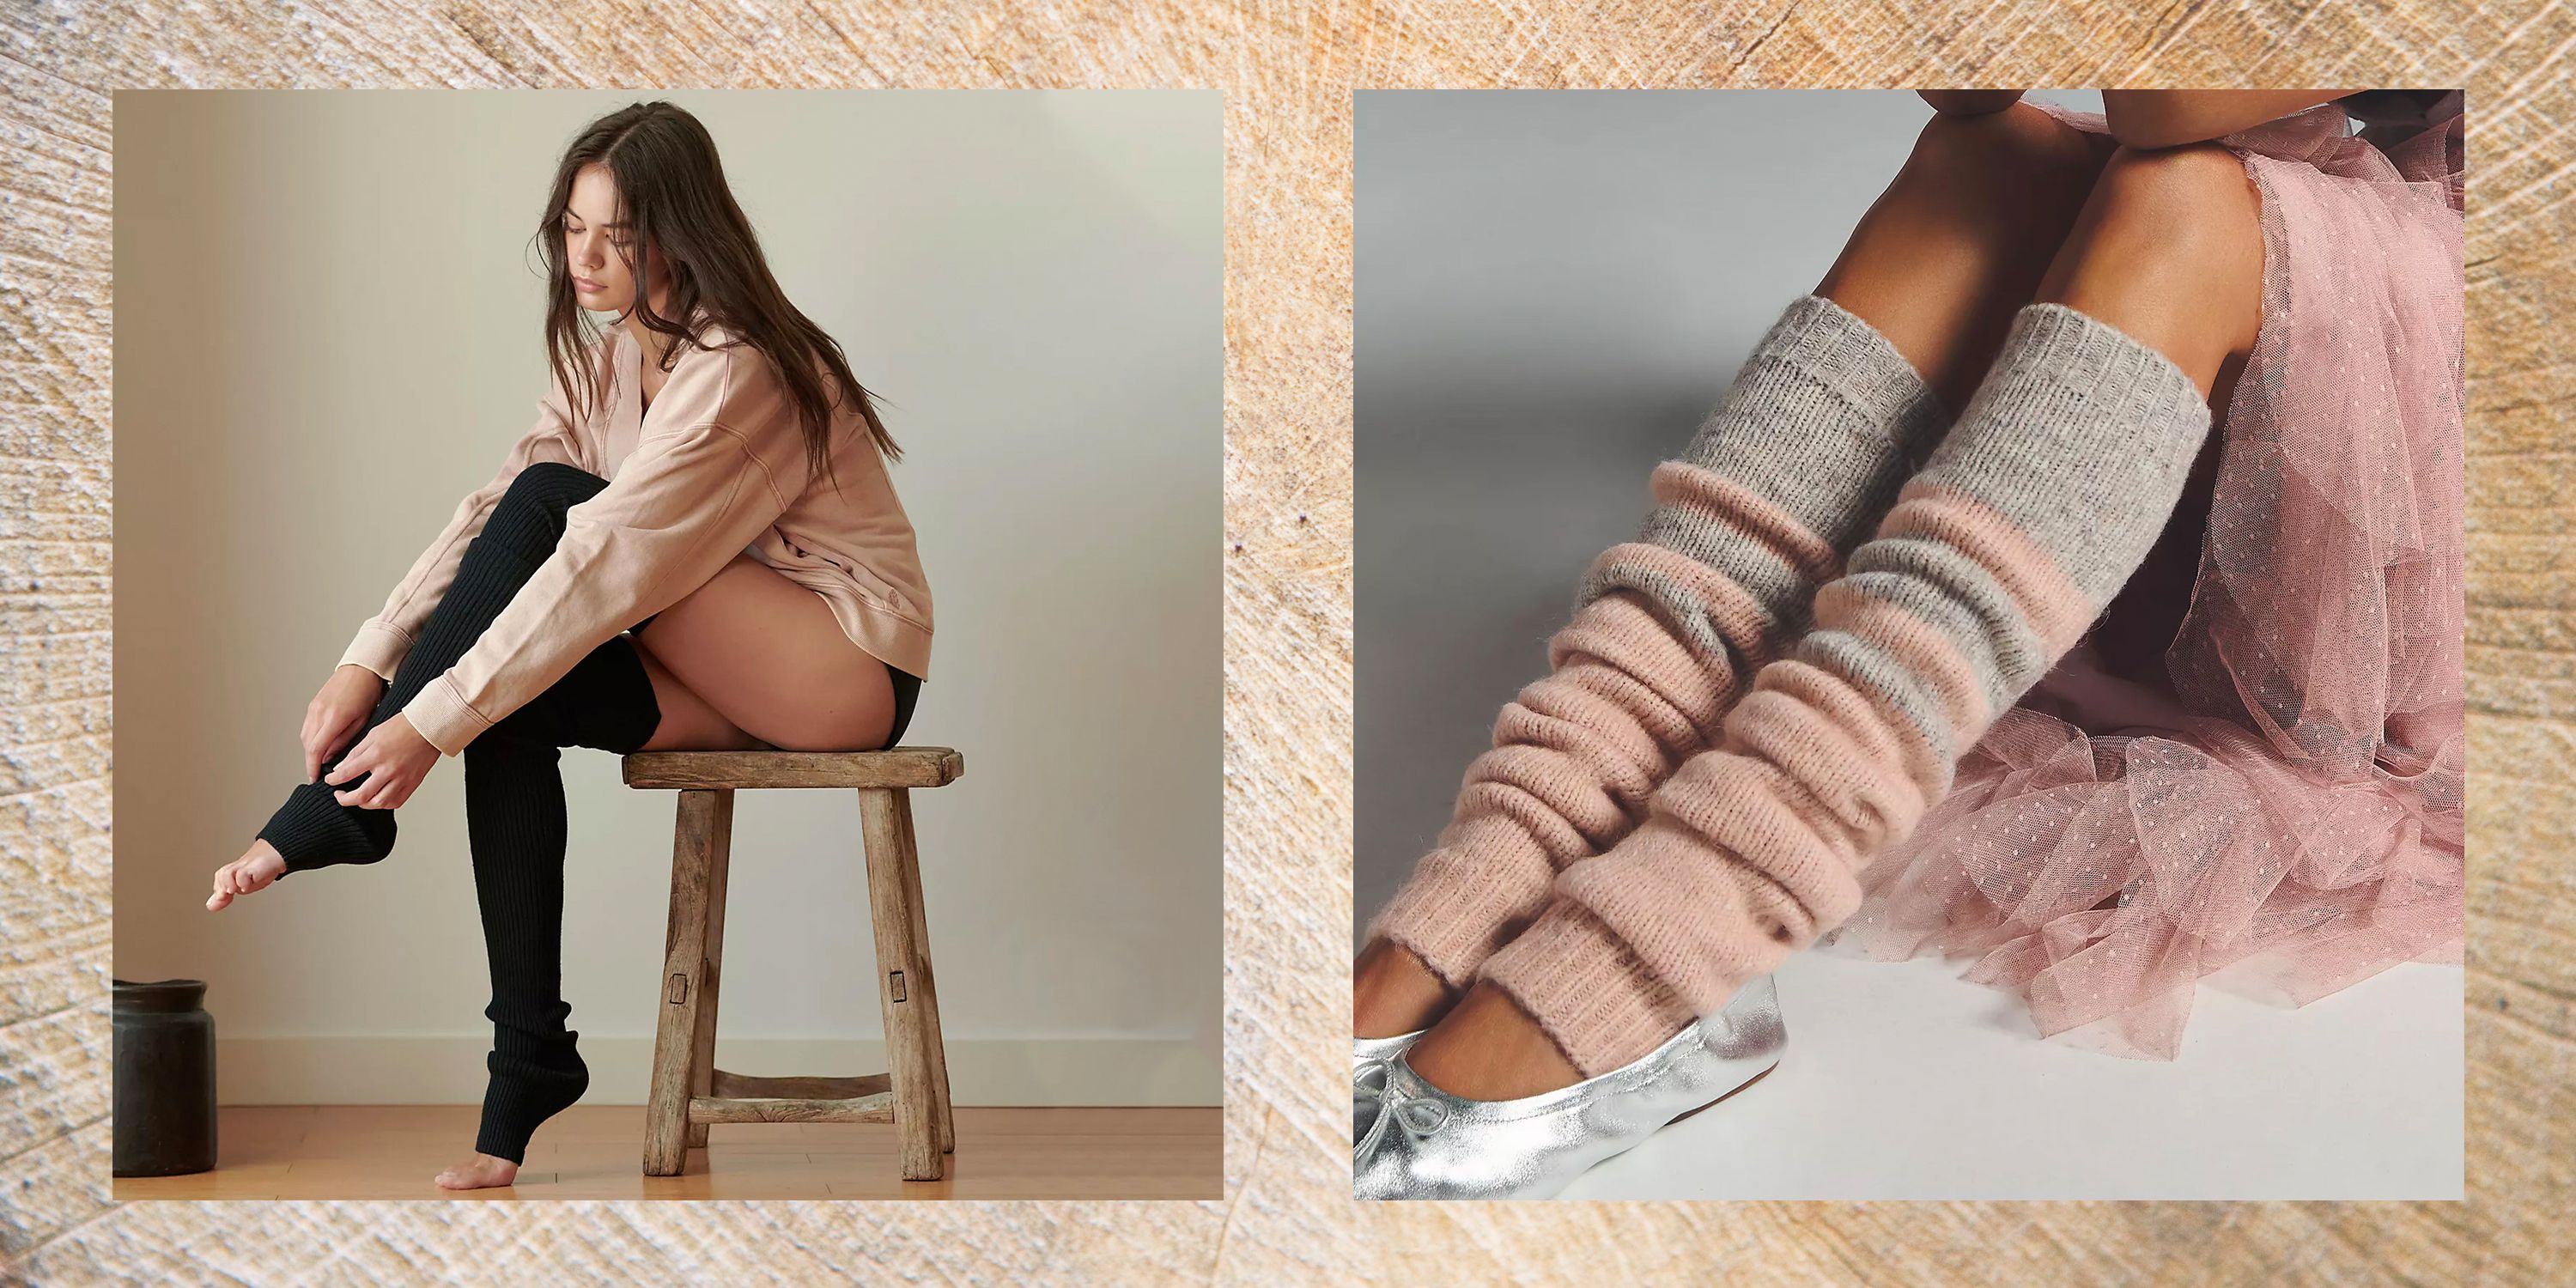 3 Ways to Wear Leg Warmers - The Budget Babe